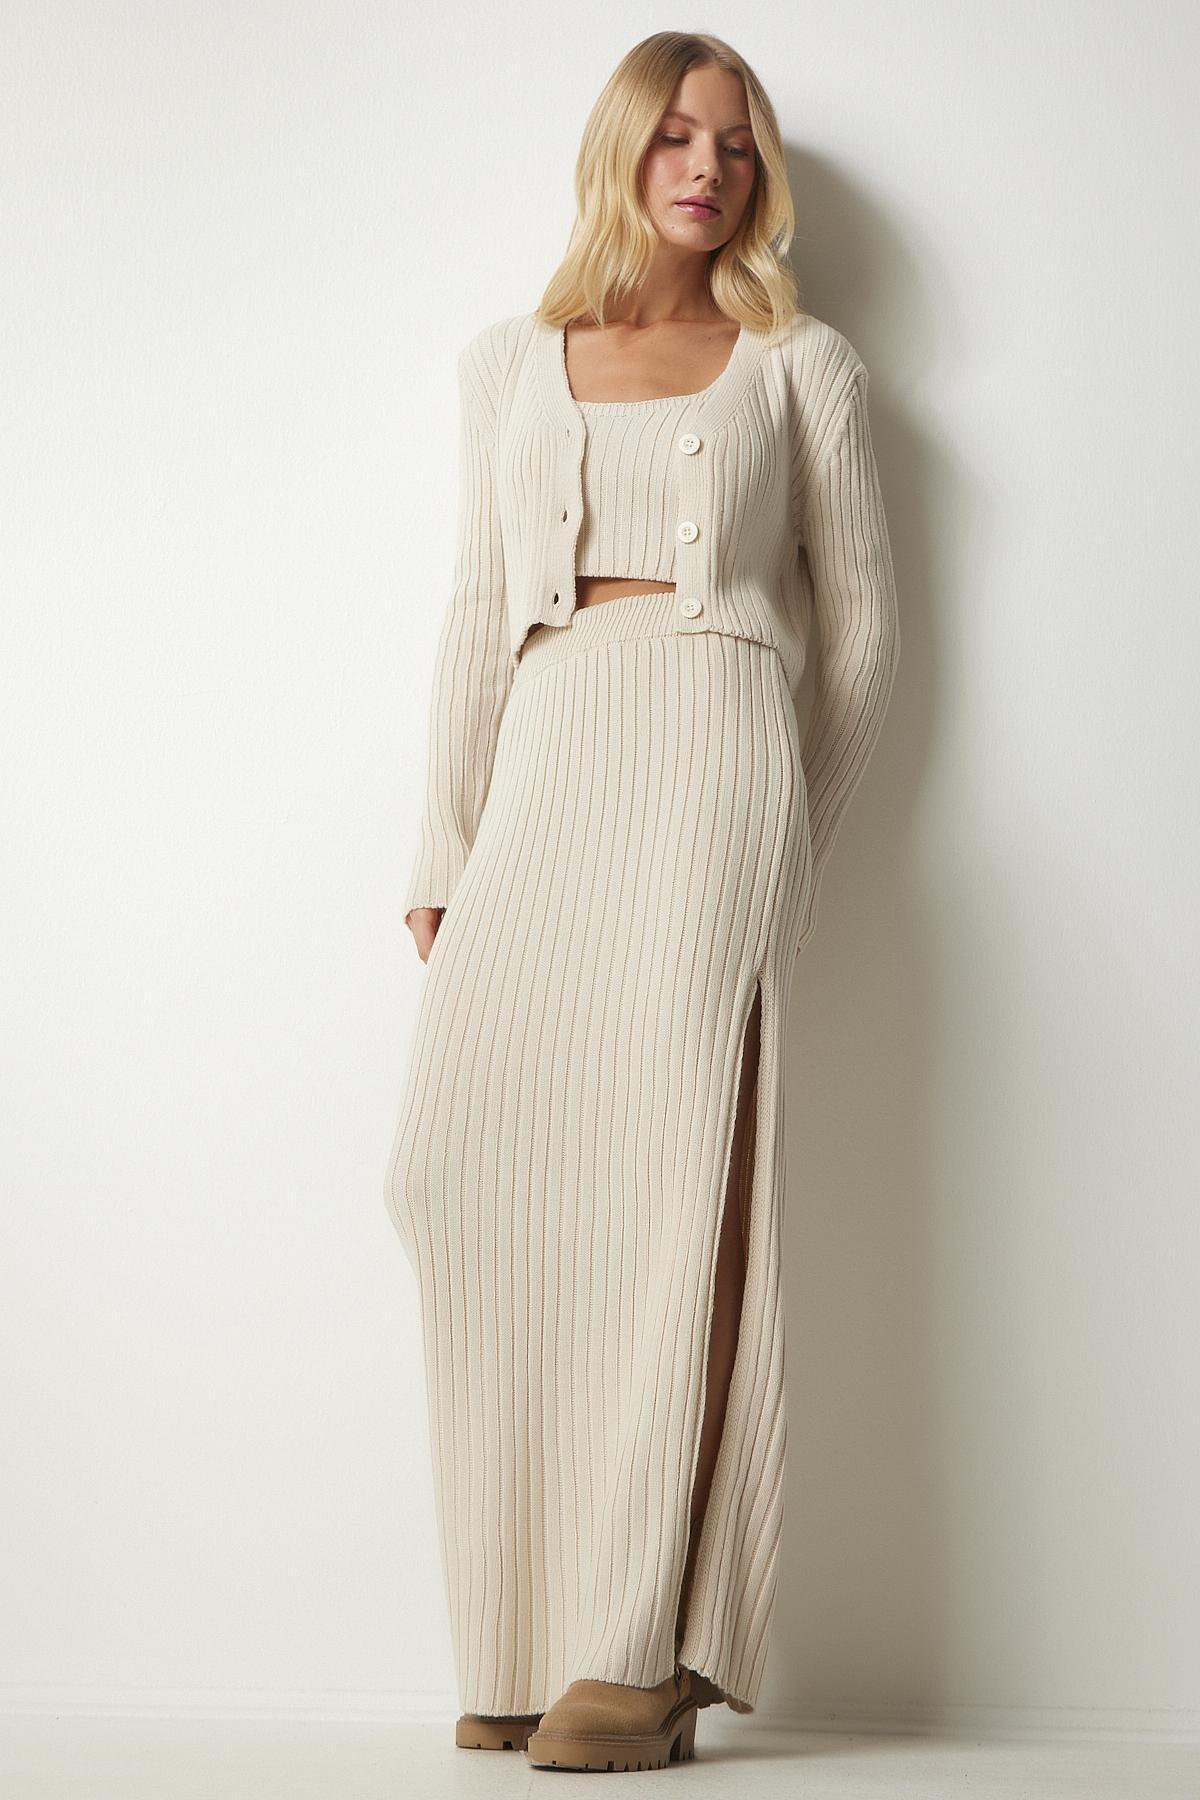 Happiness Istanbul - Cream Cardigan Athlete Skirt Knitwear Co-Ord Set